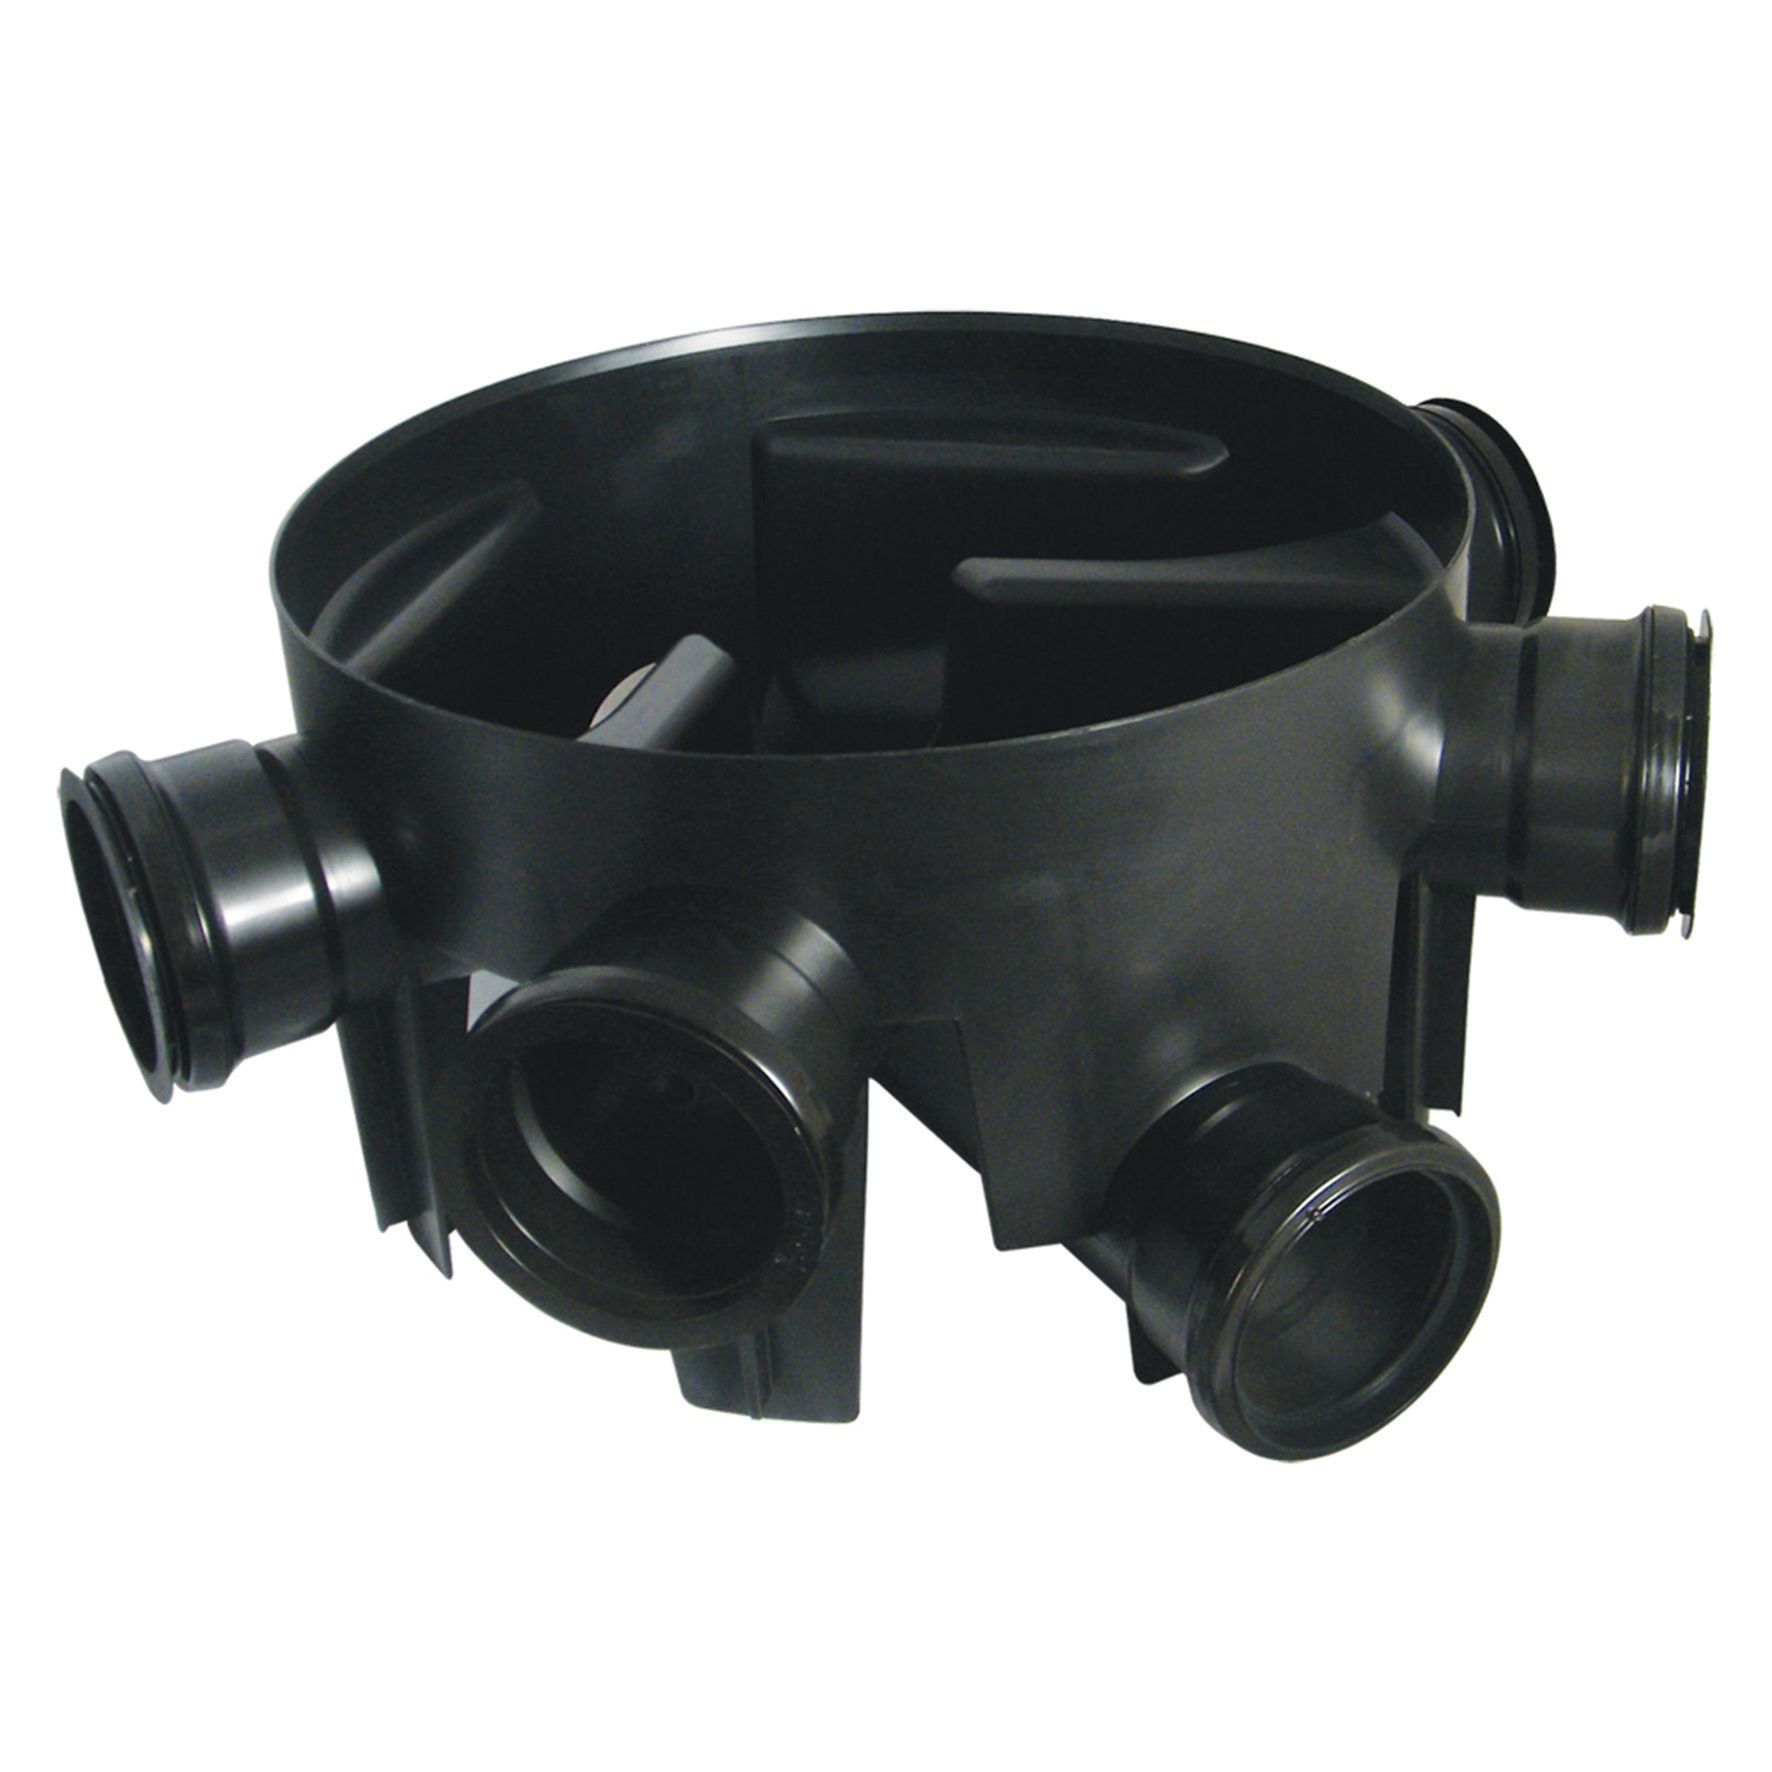 Image of FloPlast 450mm Chamber Base with 5 Fixed Inlets - Black